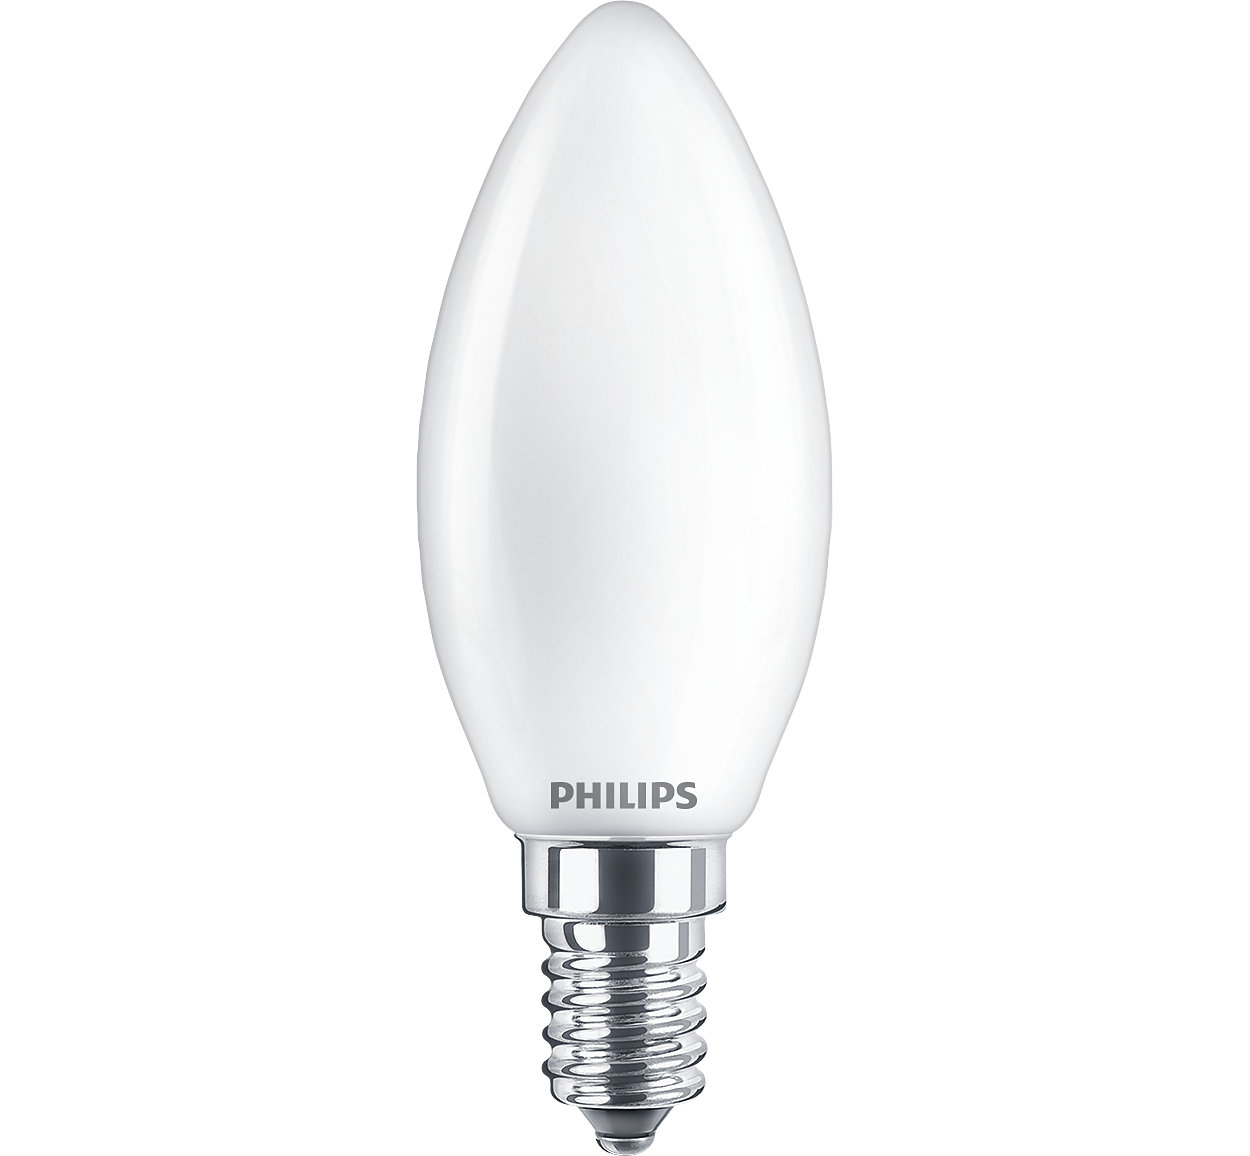 Frosted LED candle bulbs for decorative fixtures